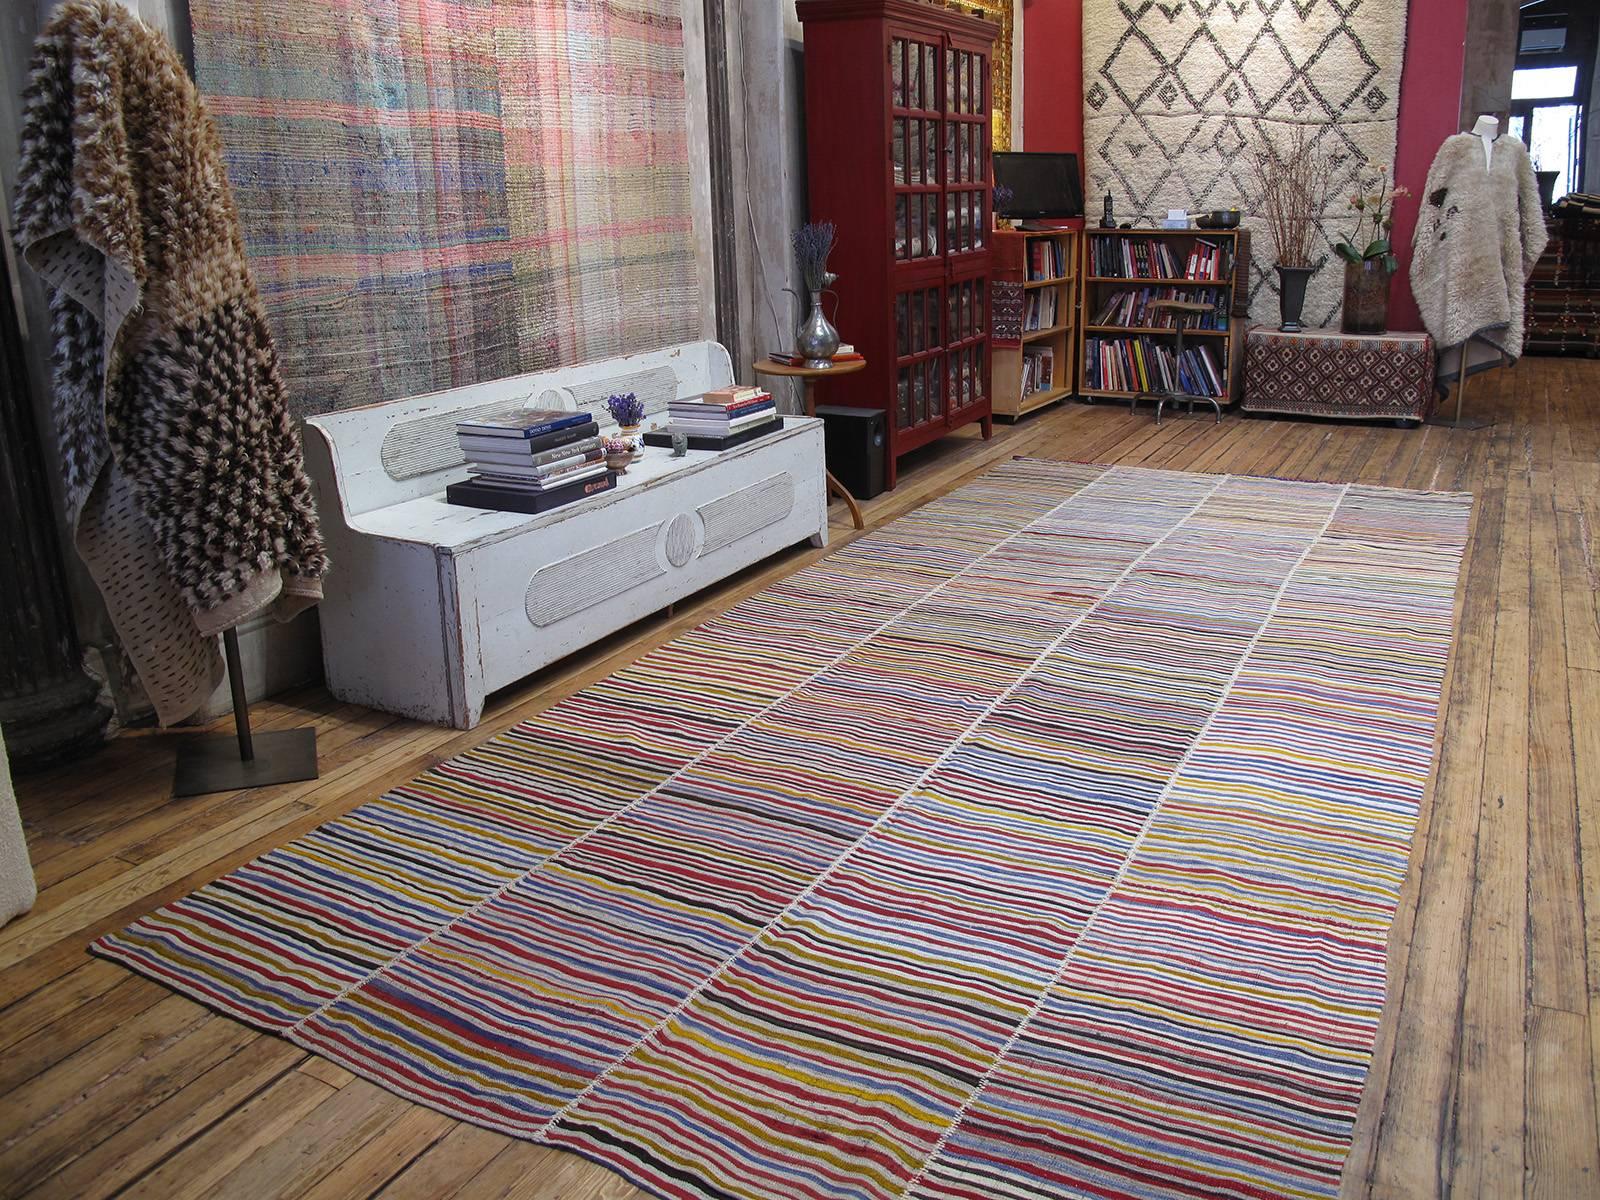 An old tribal flat-weave from Northern Iran, woven in four narrow panels and used as a simple, utilitarian floor cover in the weaver's household. Despite its humble origins, it has tremendous modern or Minimalist appeal and great authentic charm